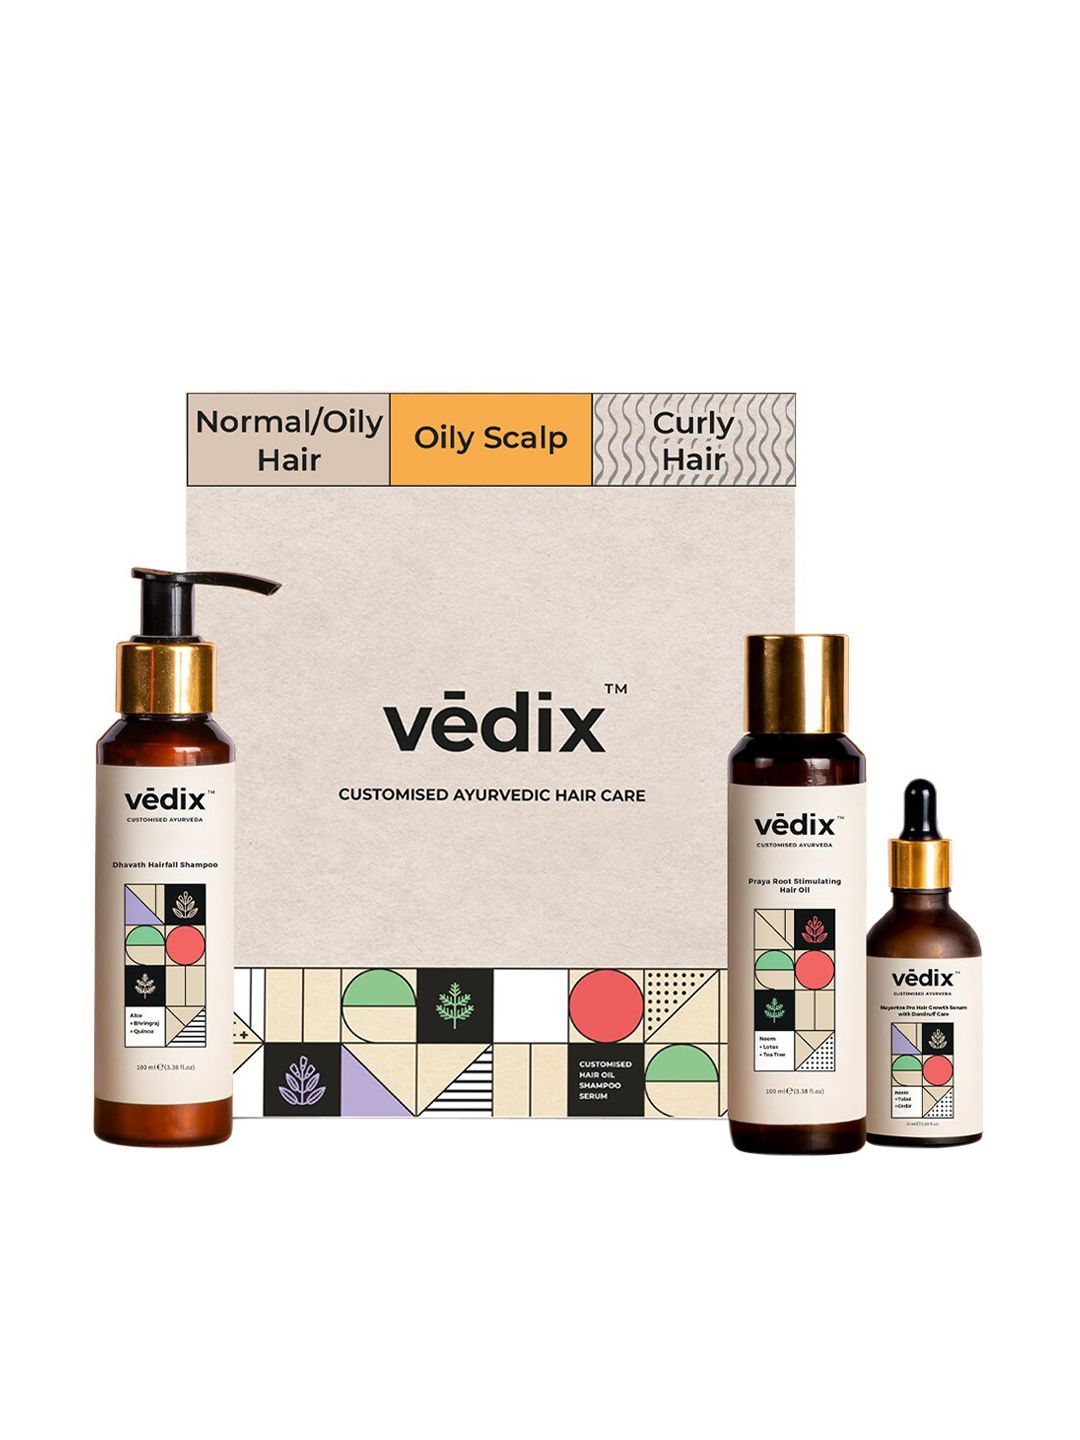 VEDIX Customized Hair Fall Control Regimen for Normal/Oily Hair- Oily Scalp+Curly Hair Price in India